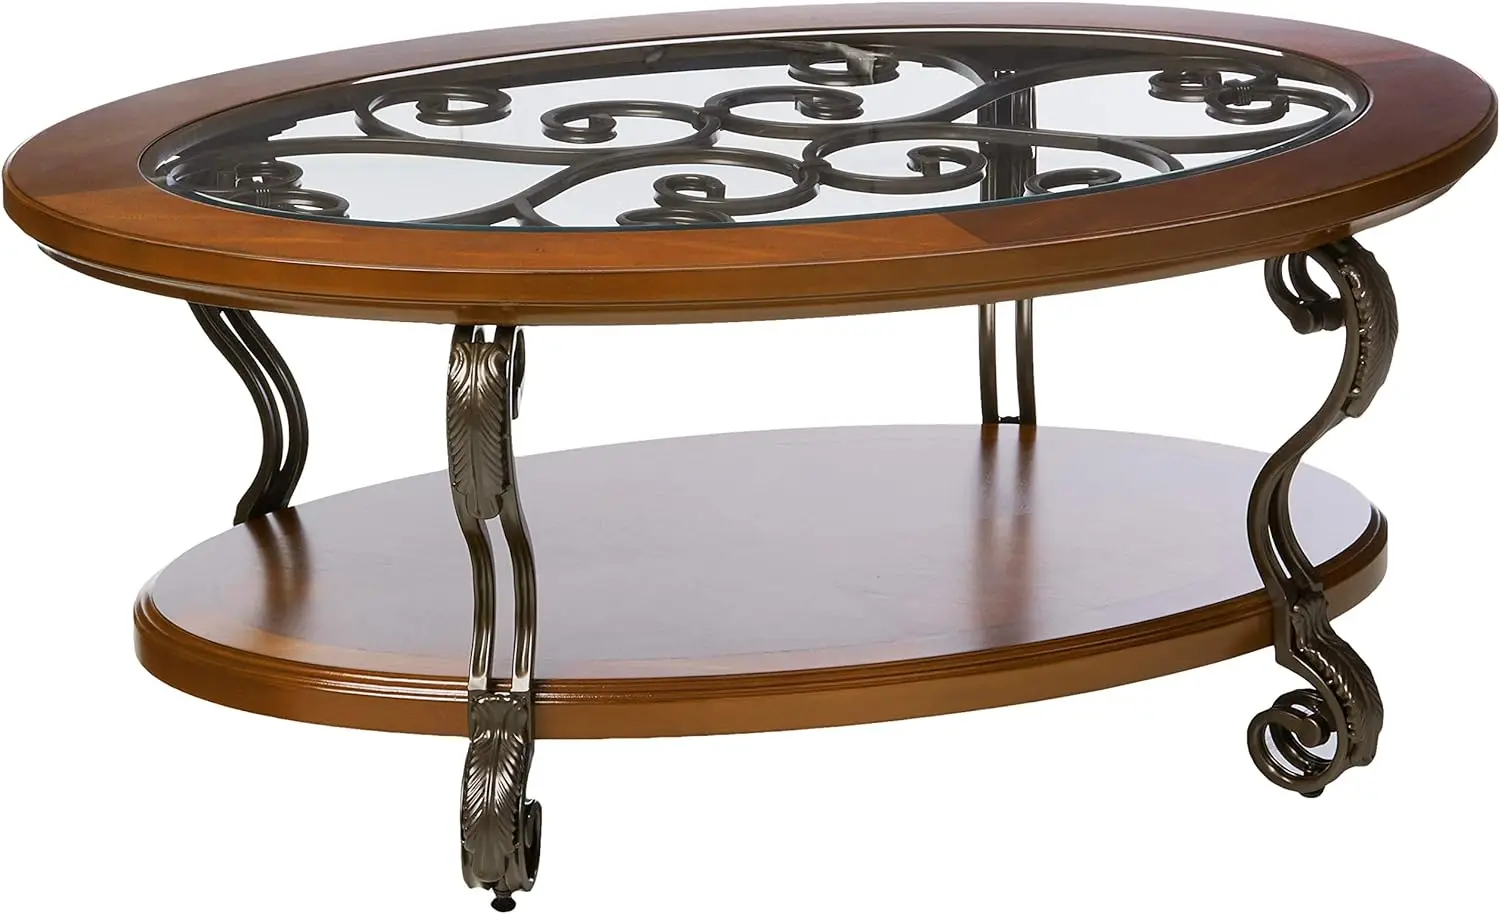 

Signature Design by Ashley Nestor Traditional Oval Coffee Table with Beveled Glass Top, Scrollwork Underlay and 1 Fixed Shelf,